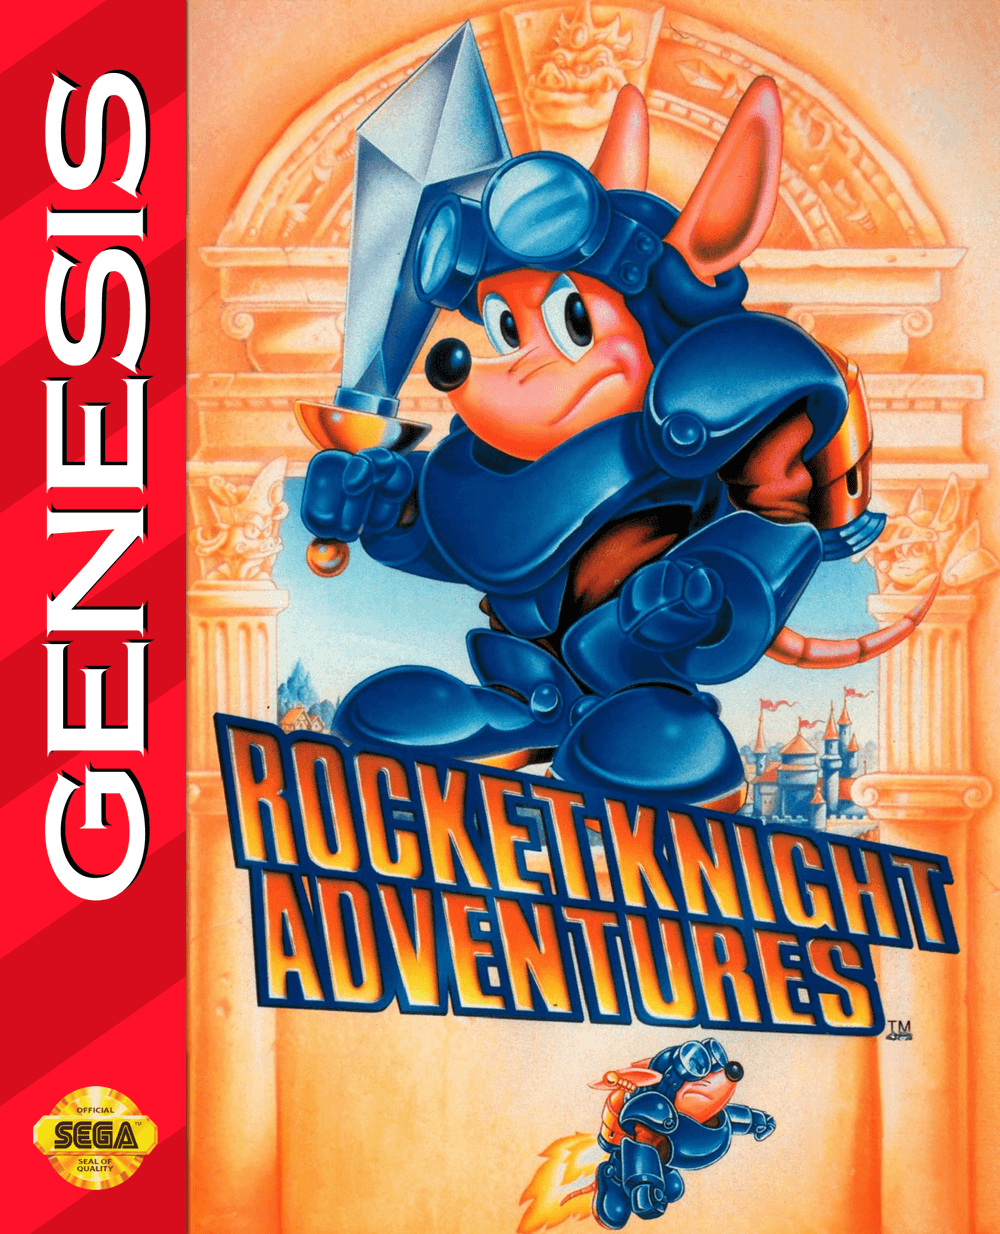 Rocket Knight Adventures - Play game online